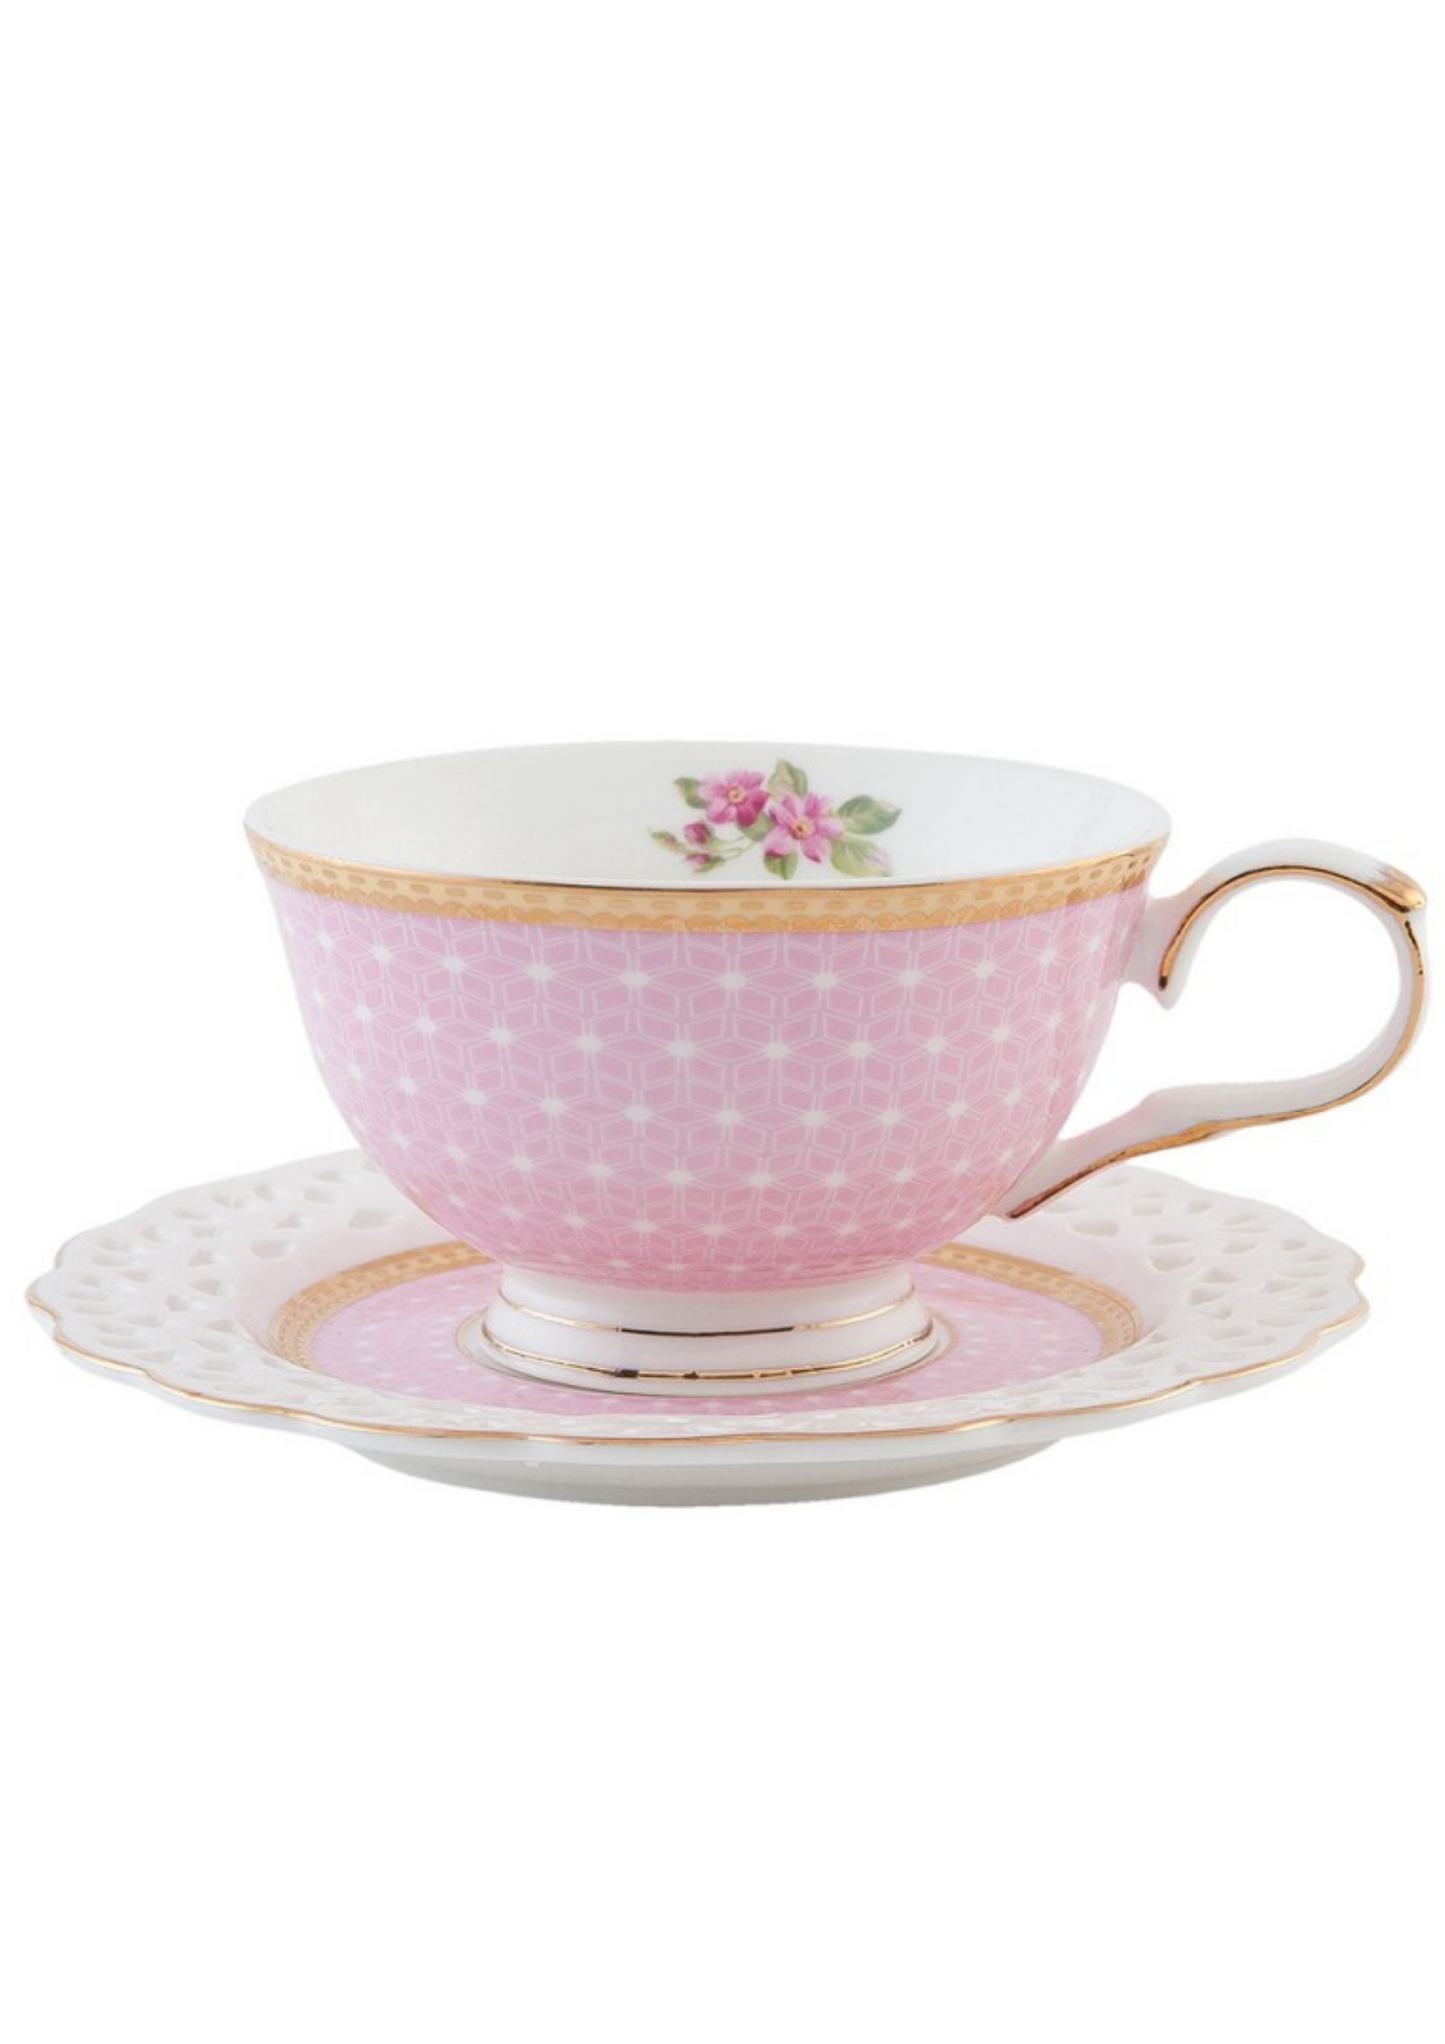 Pink lace tea cup